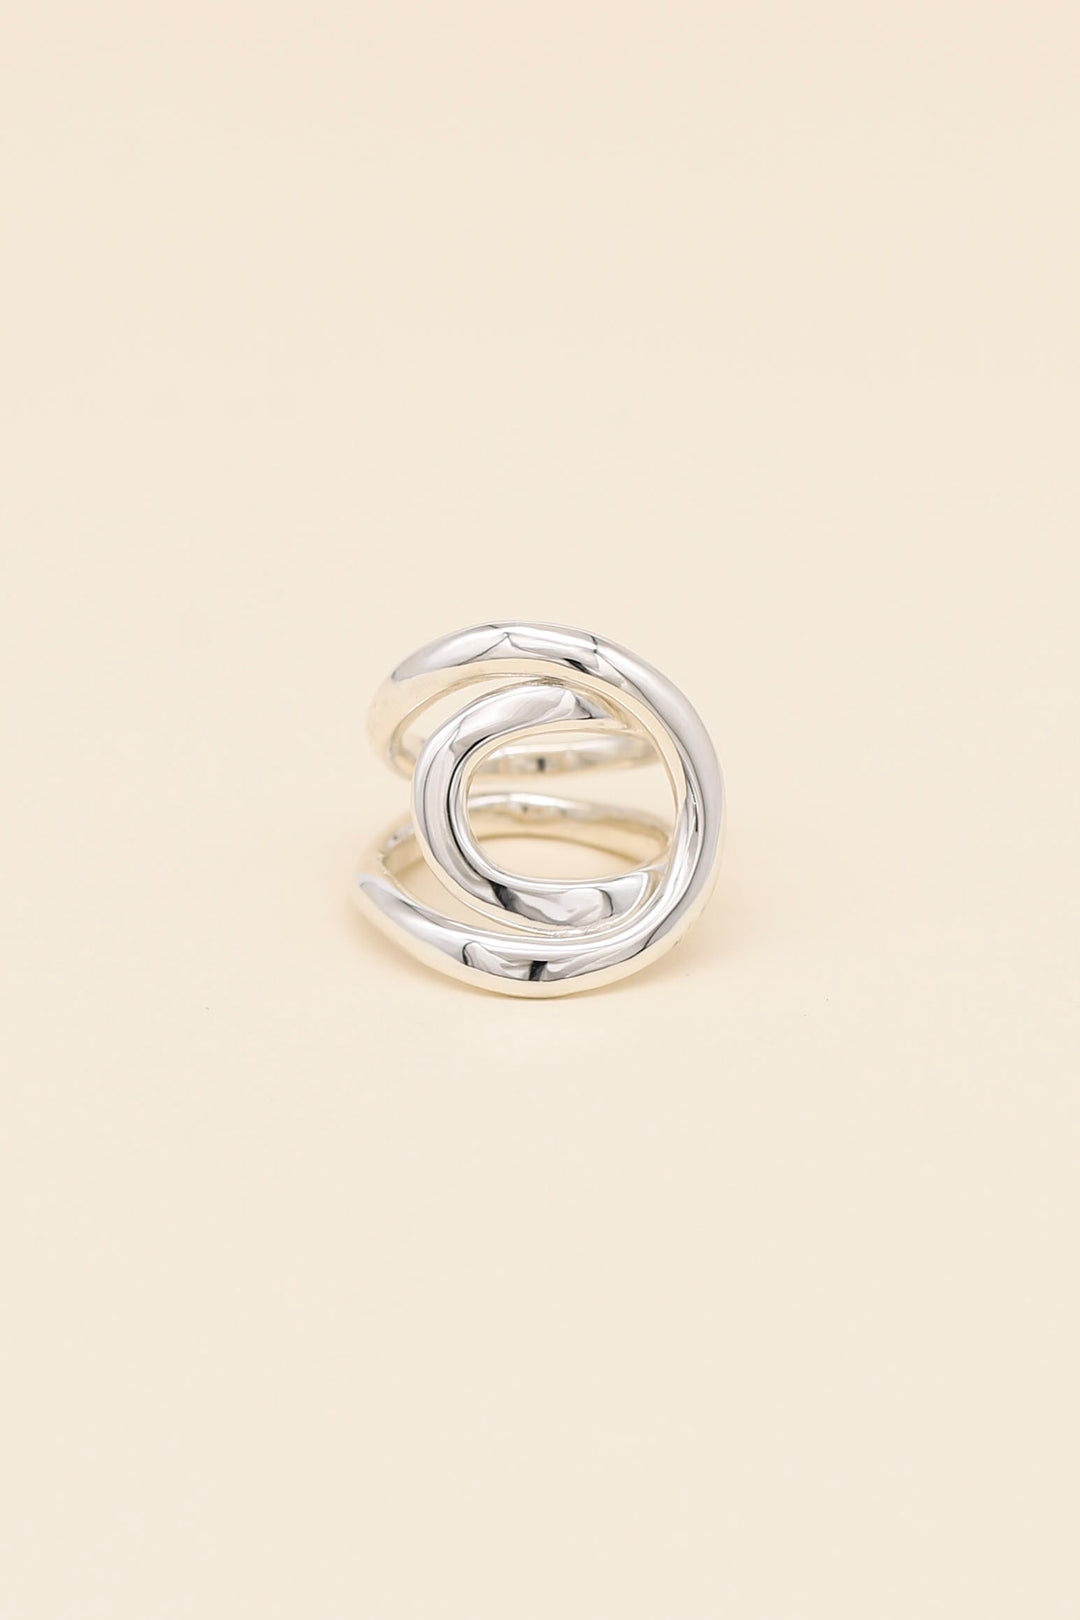 Sprout / SP-R15 / RING